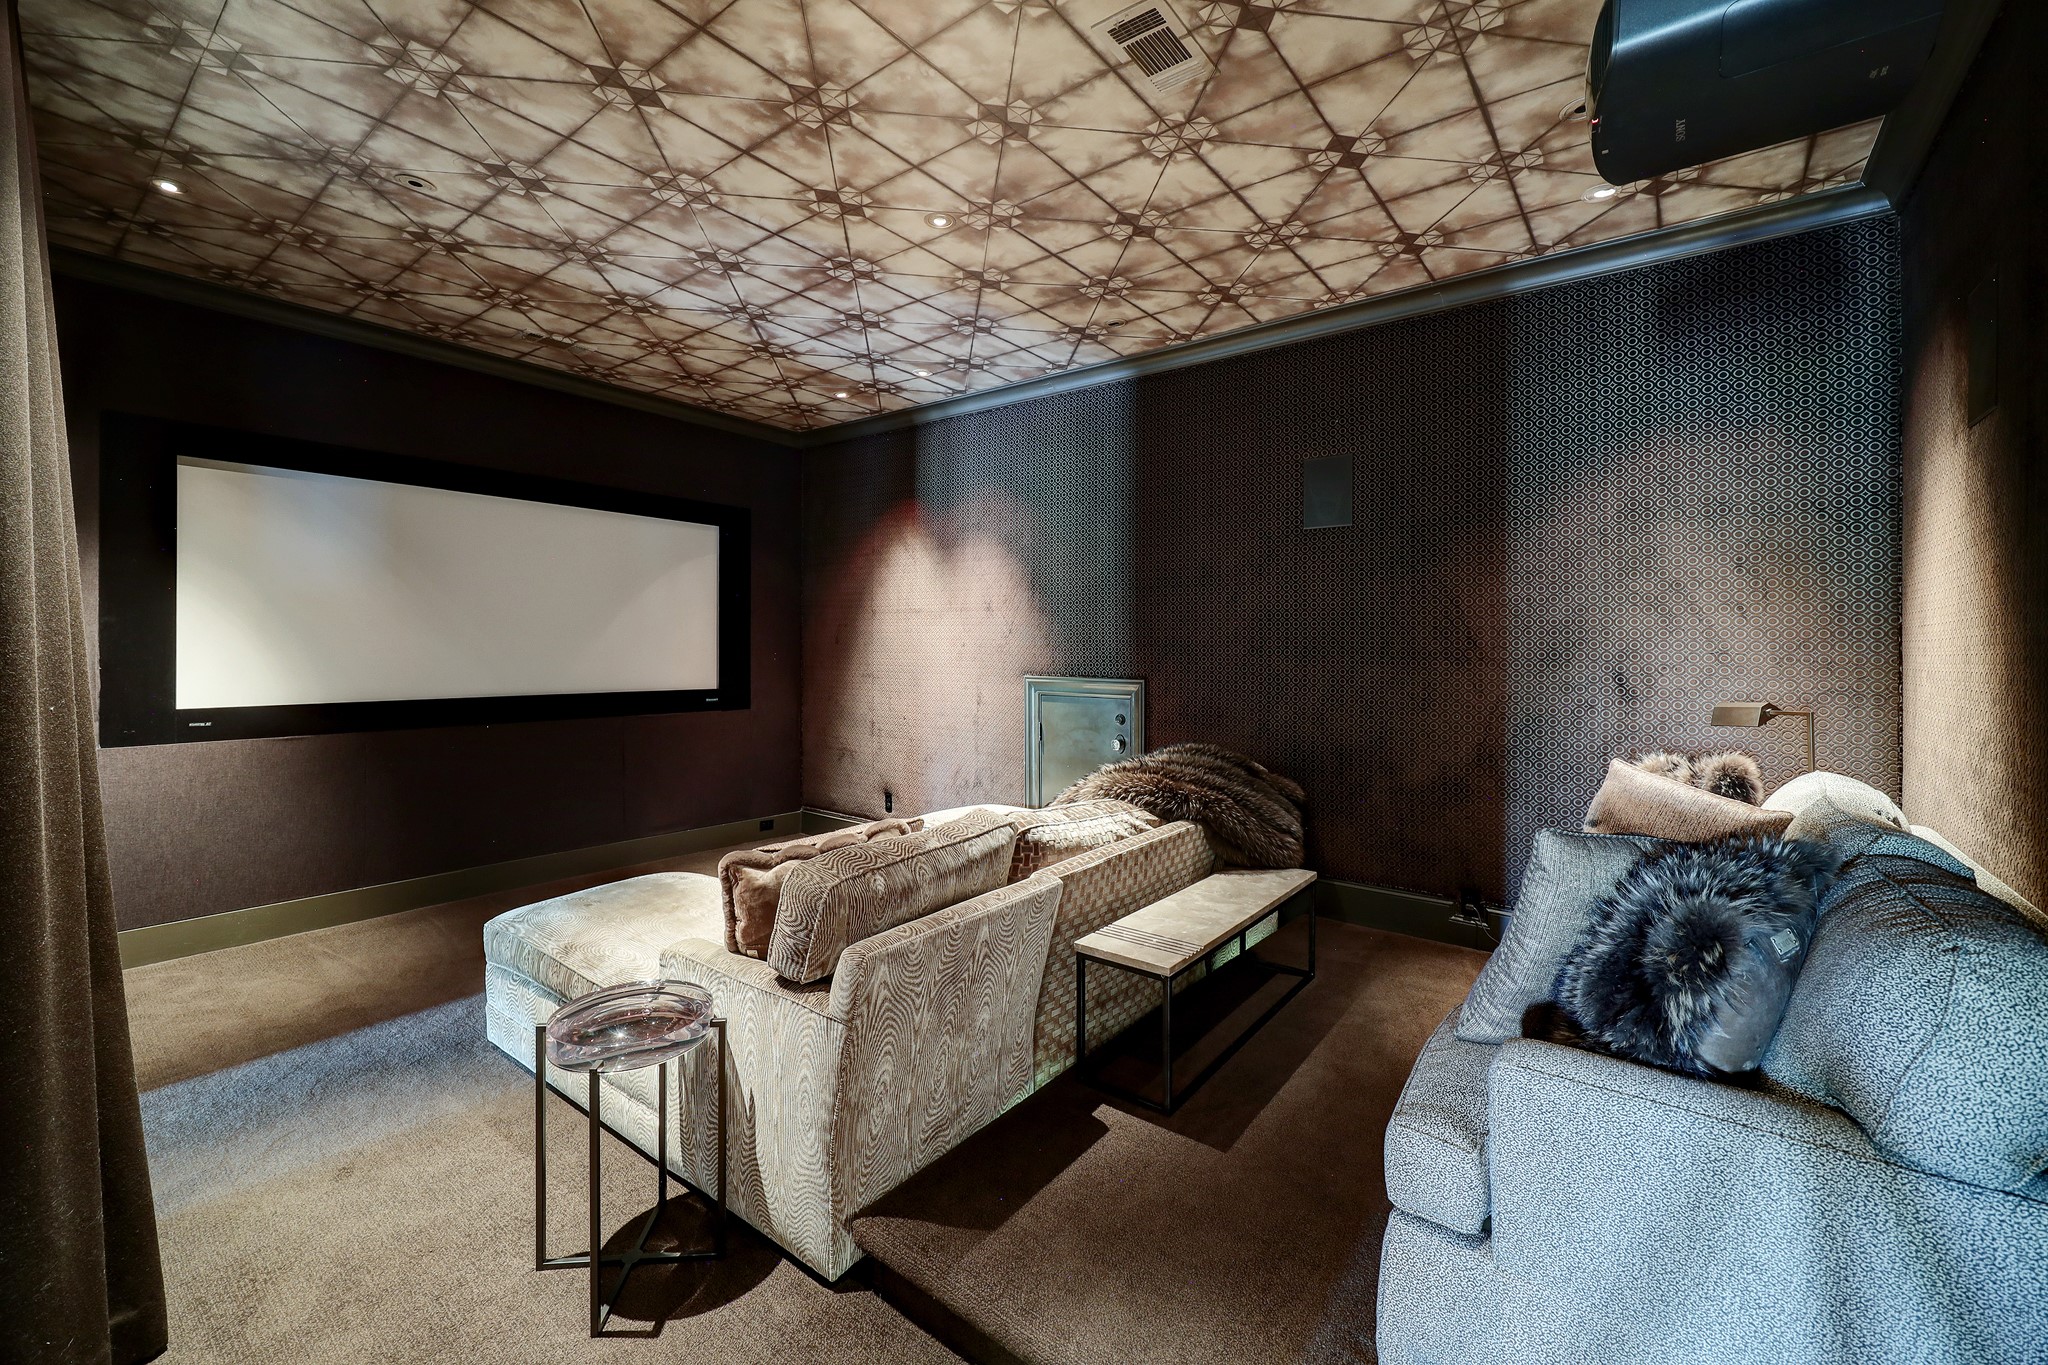 The cinema is artfully designed for entertainment and relaxation and is acoustically optimized for an enhanced experience.